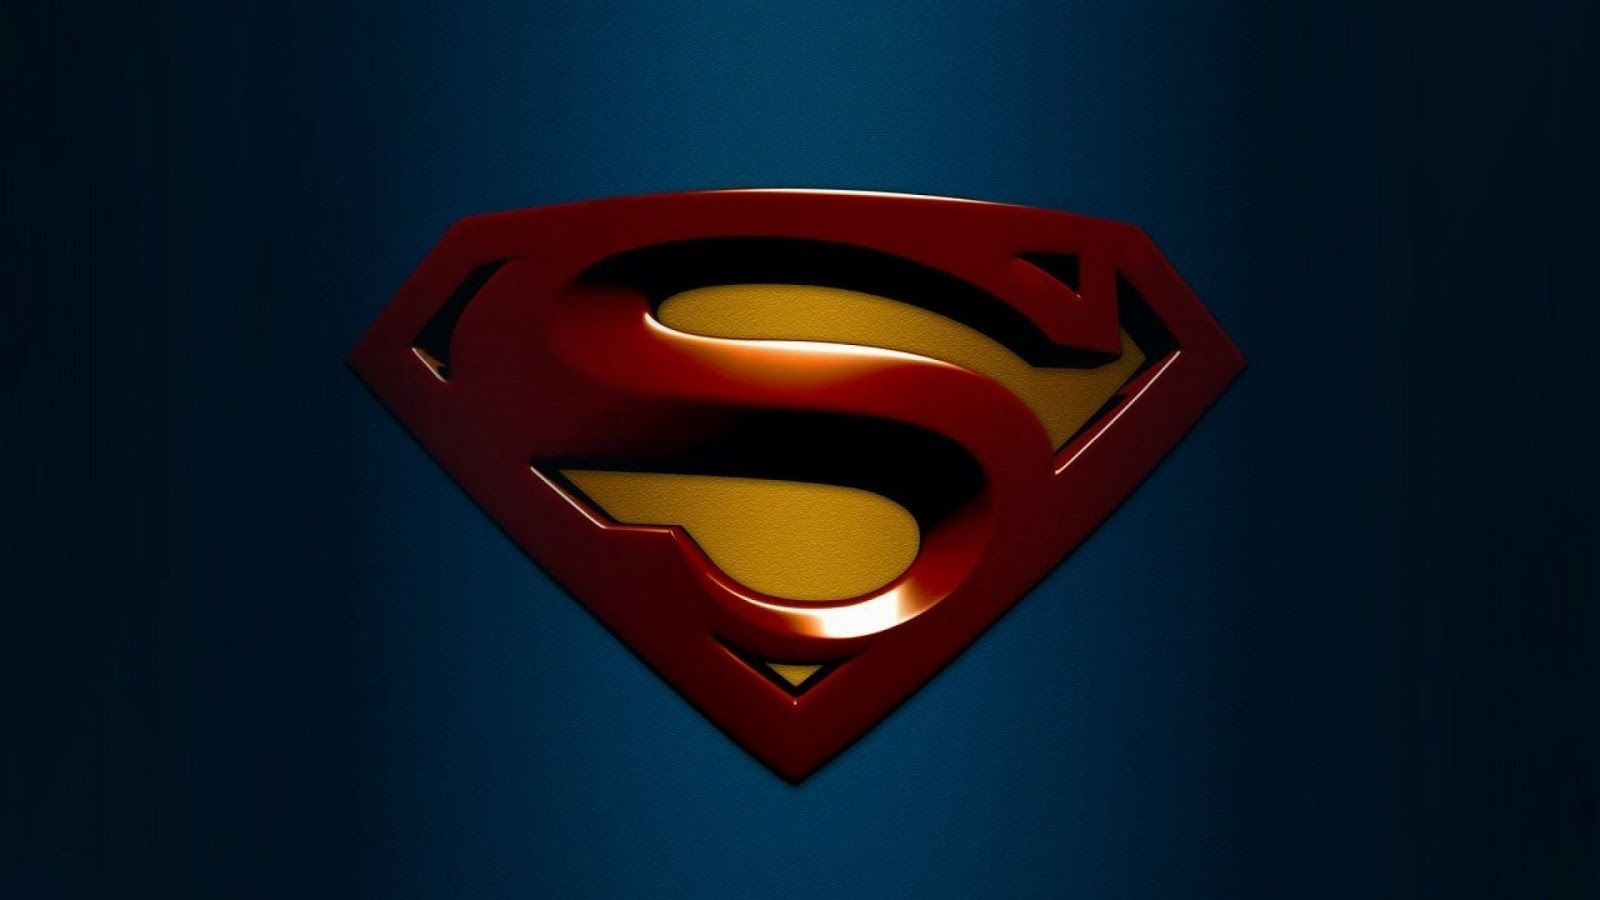 2013 Superman Logo Wallpaper Images amp Pictures   Becuo